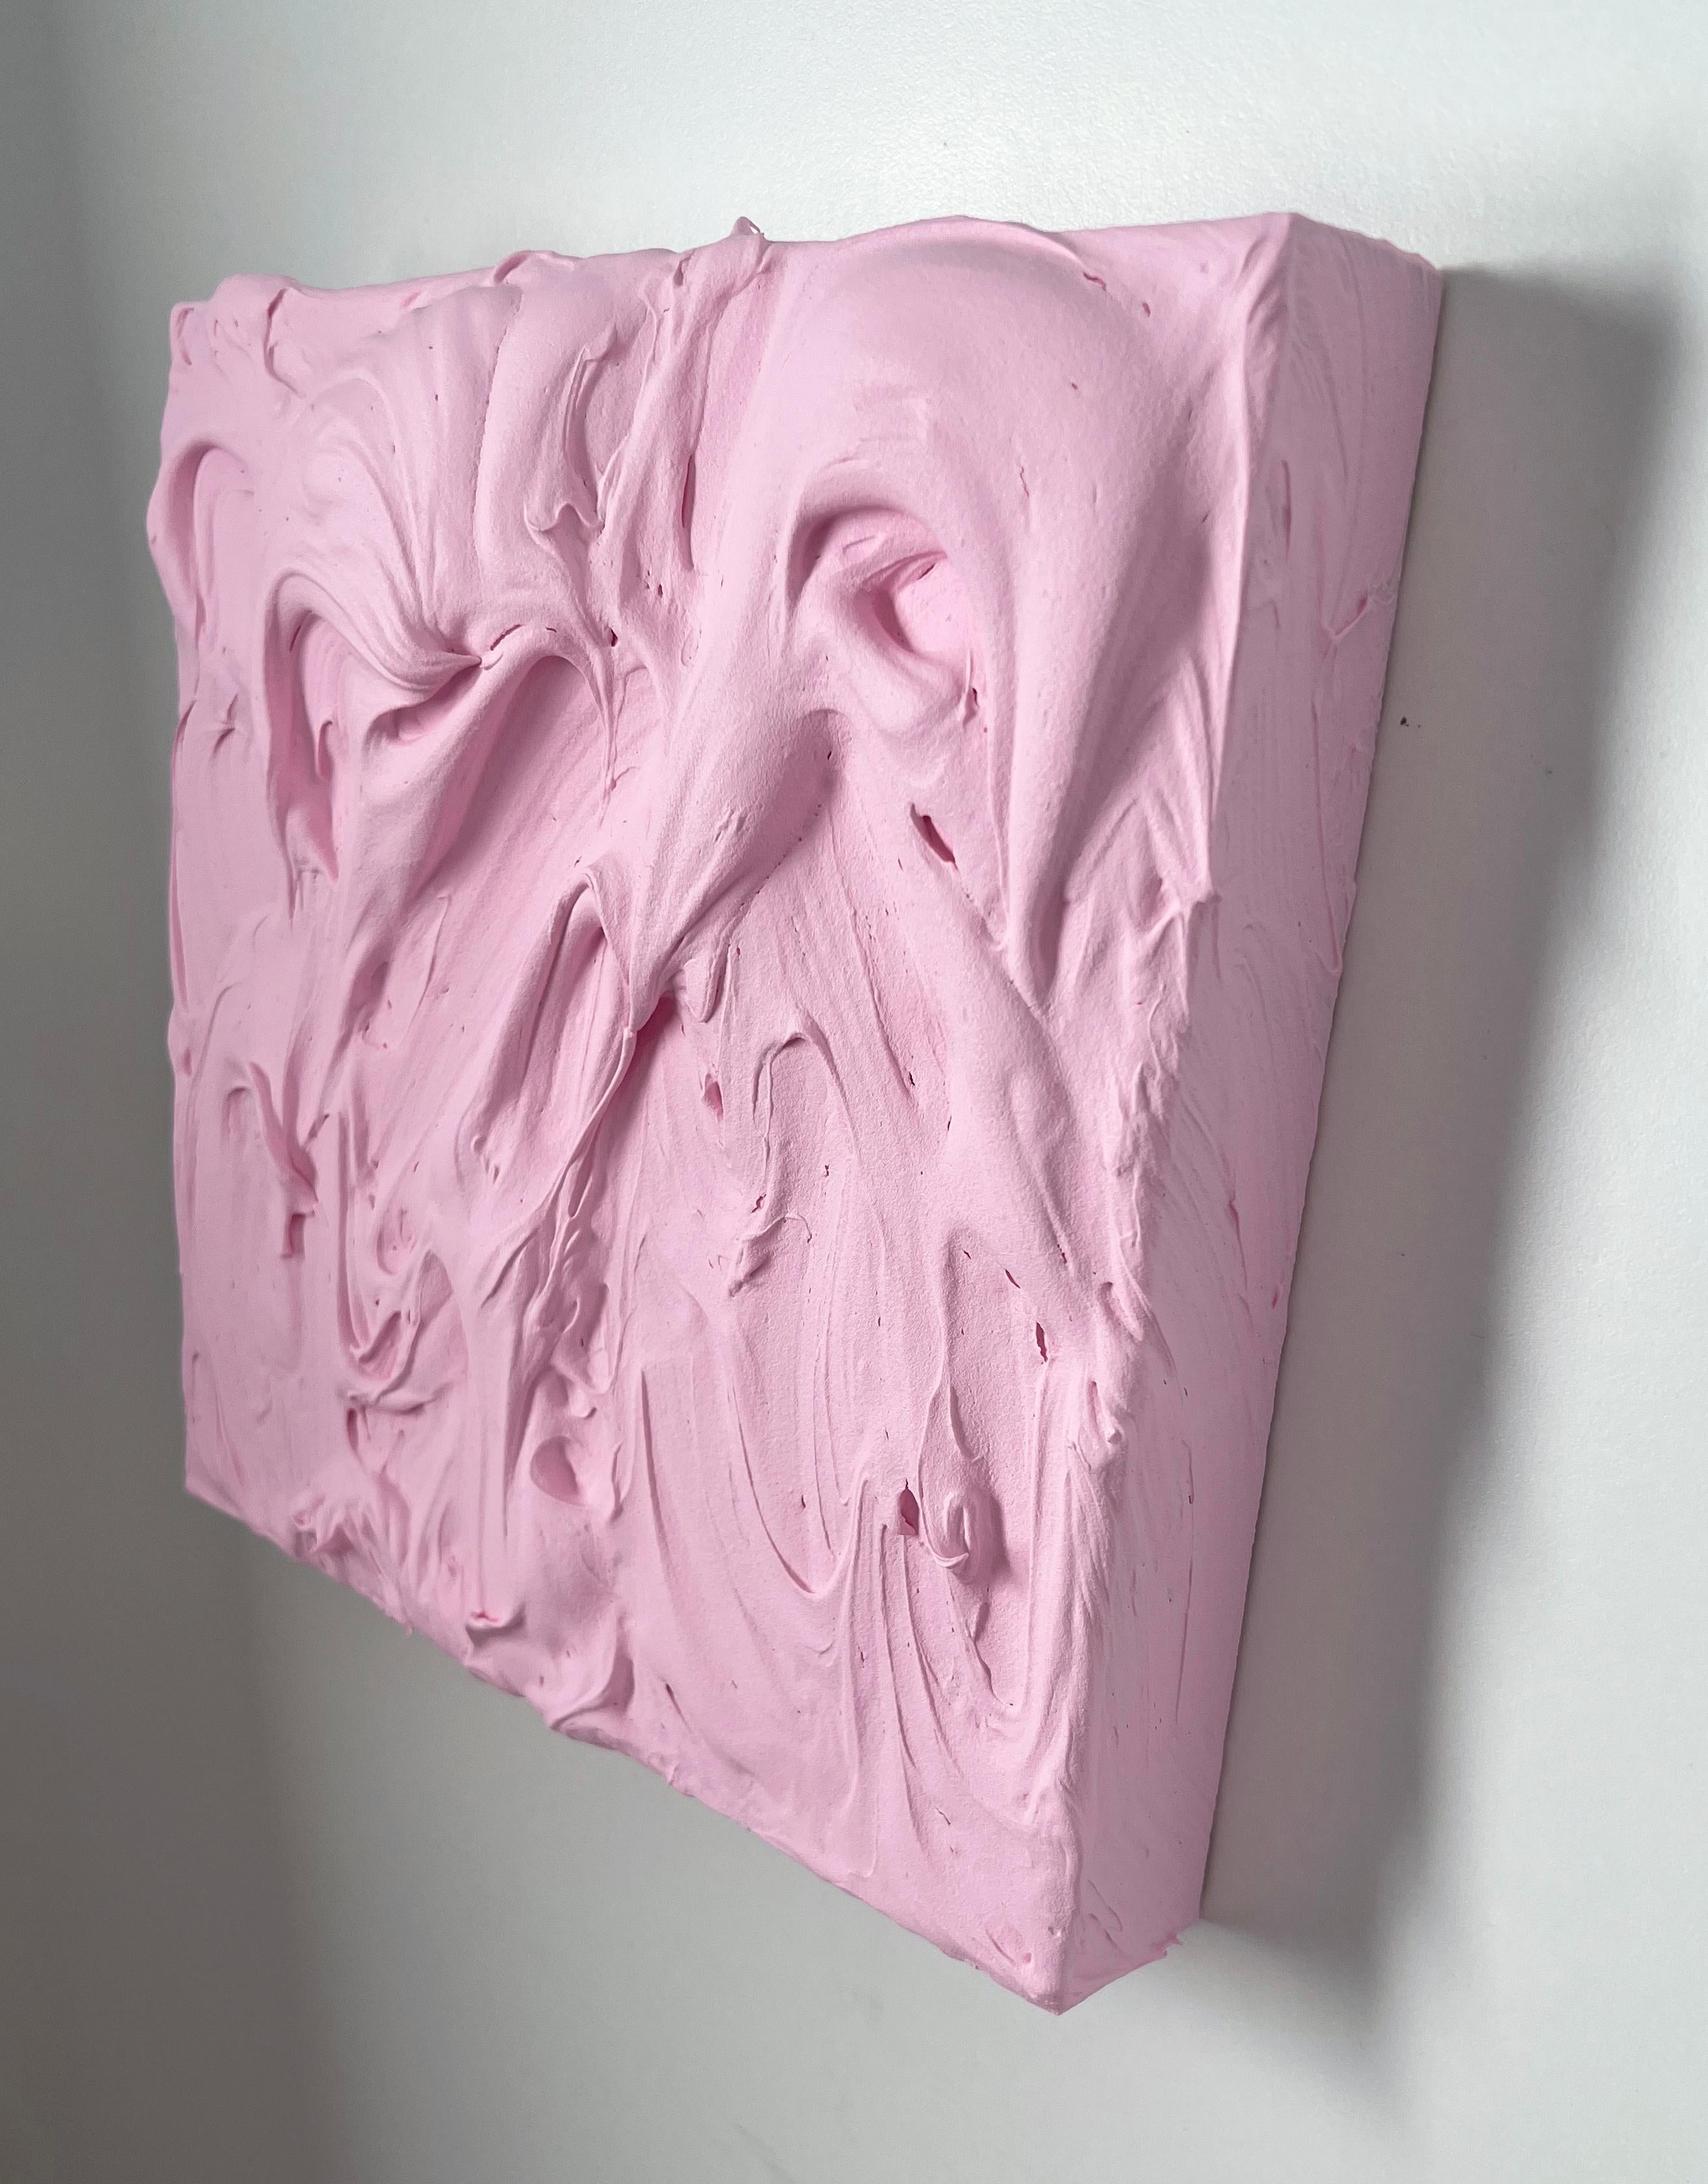 Baby Pink Excess (rose impasto thick painting monochrome pop square design) - Pop Art Sculpture by Chloe Hedden